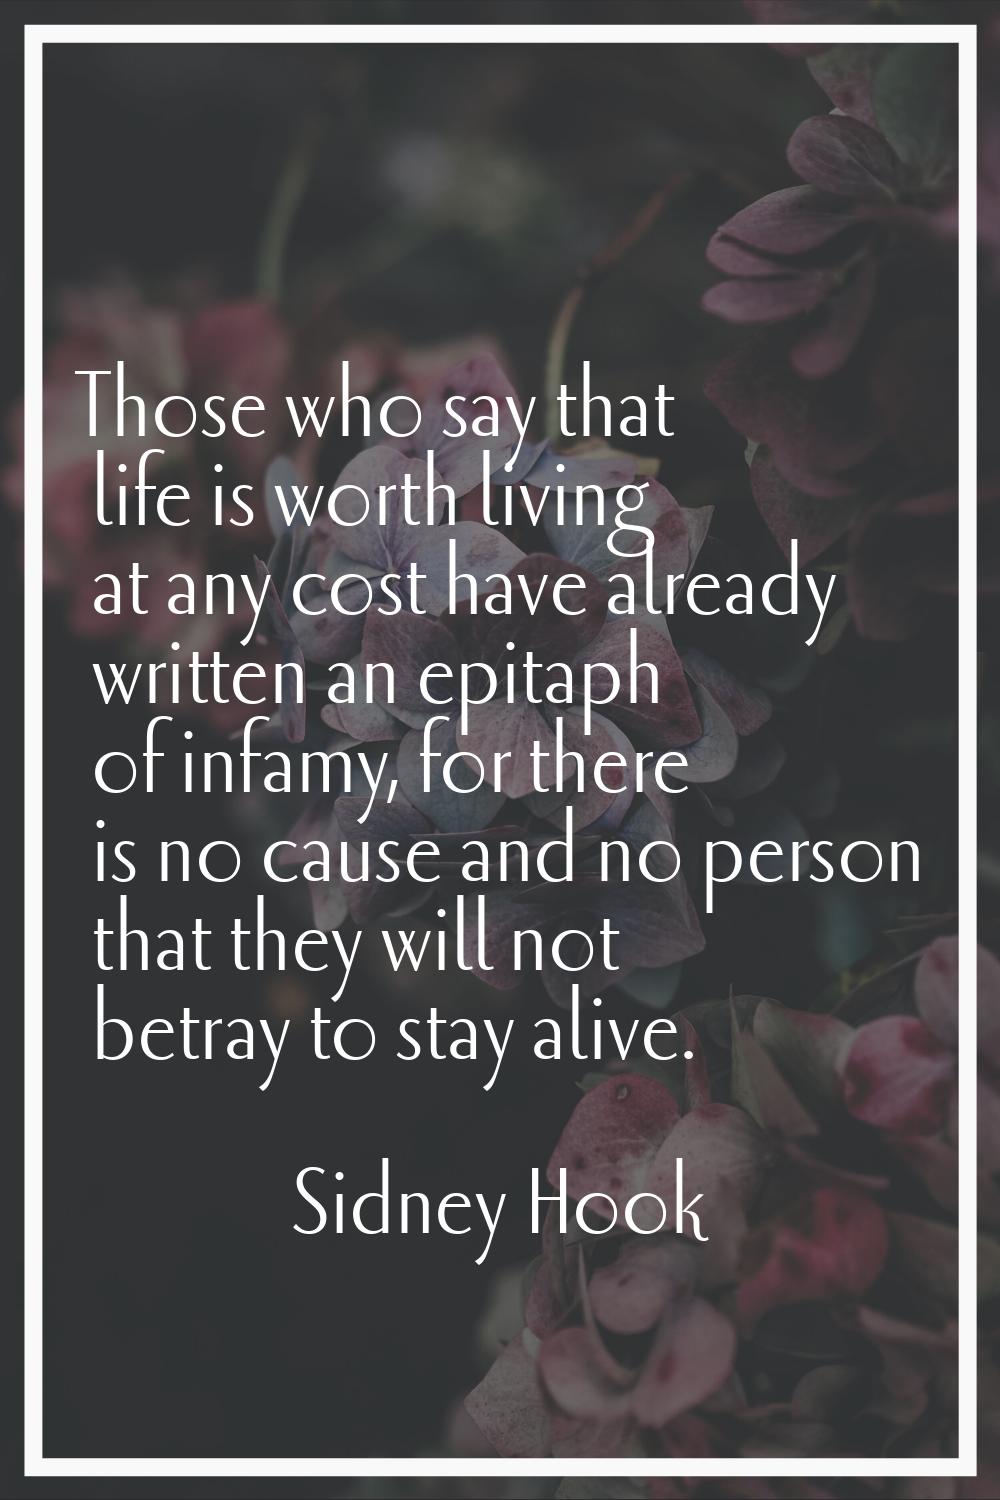 Those who say that life is worth living at any cost have already written an epitaph of infamy, for 